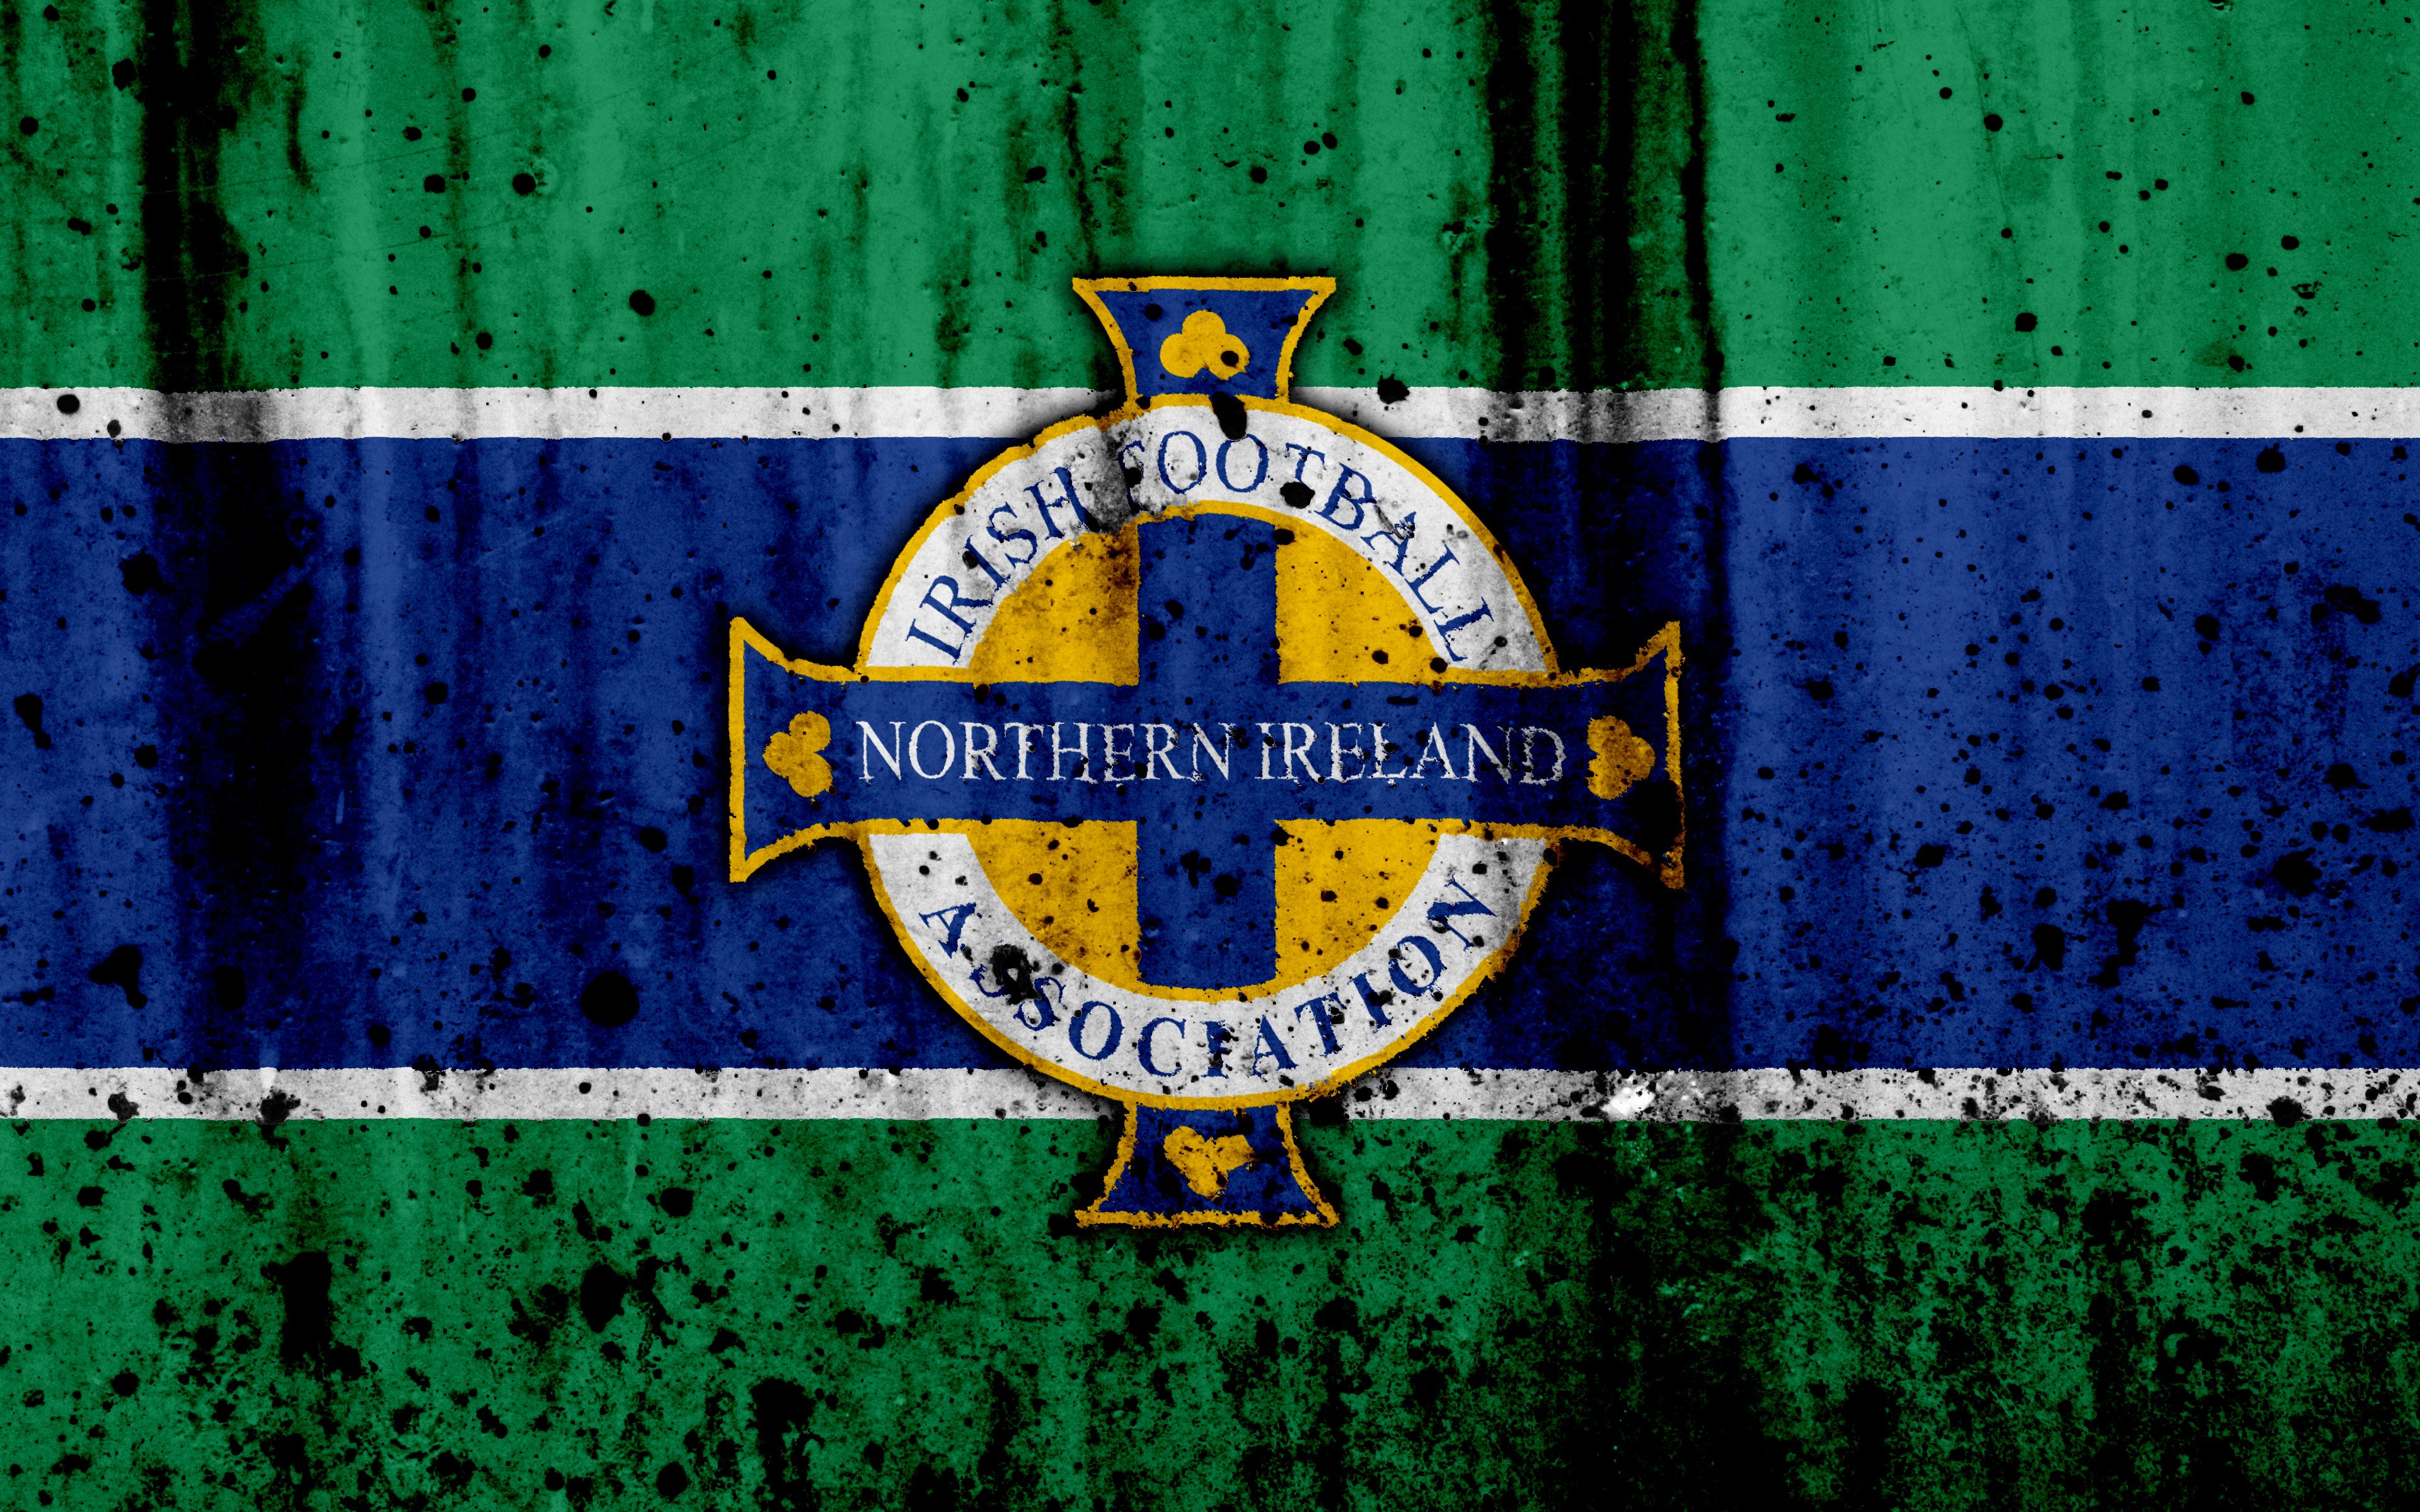 Free download Northern Ireland National Football Team 4k Ultra HD Wallpaper [3840x2400] for your Desktop, Mobile & Tablet. Explore Northern Ireland Soccer Wallpaper. Northern Ireland Soccer Wallpaper, Northern Ireland